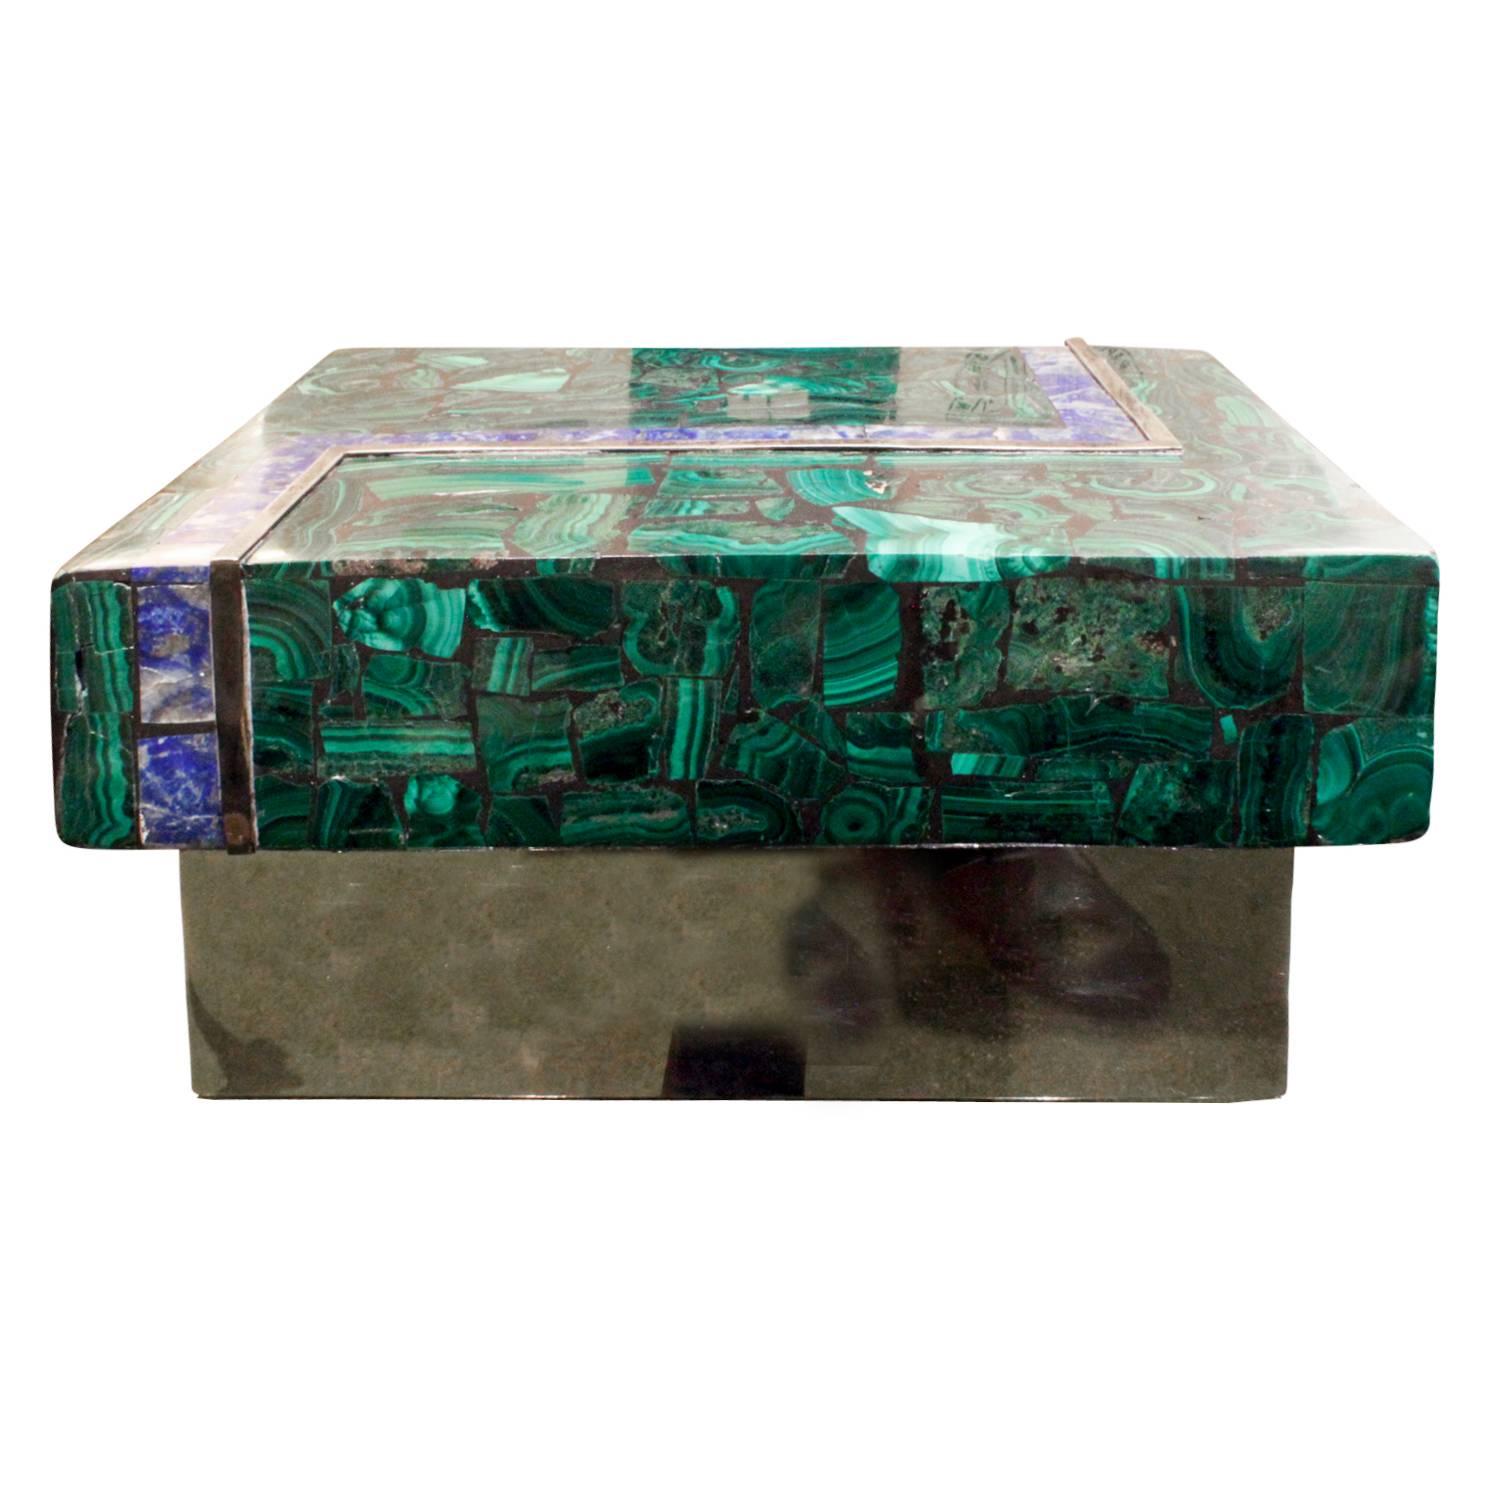 Box in stainless steel with cover clad in semi precious malachite and lapis lazuli with silver accents by Karl Springer, American, 1970s. The interior of the box is covered in leather.